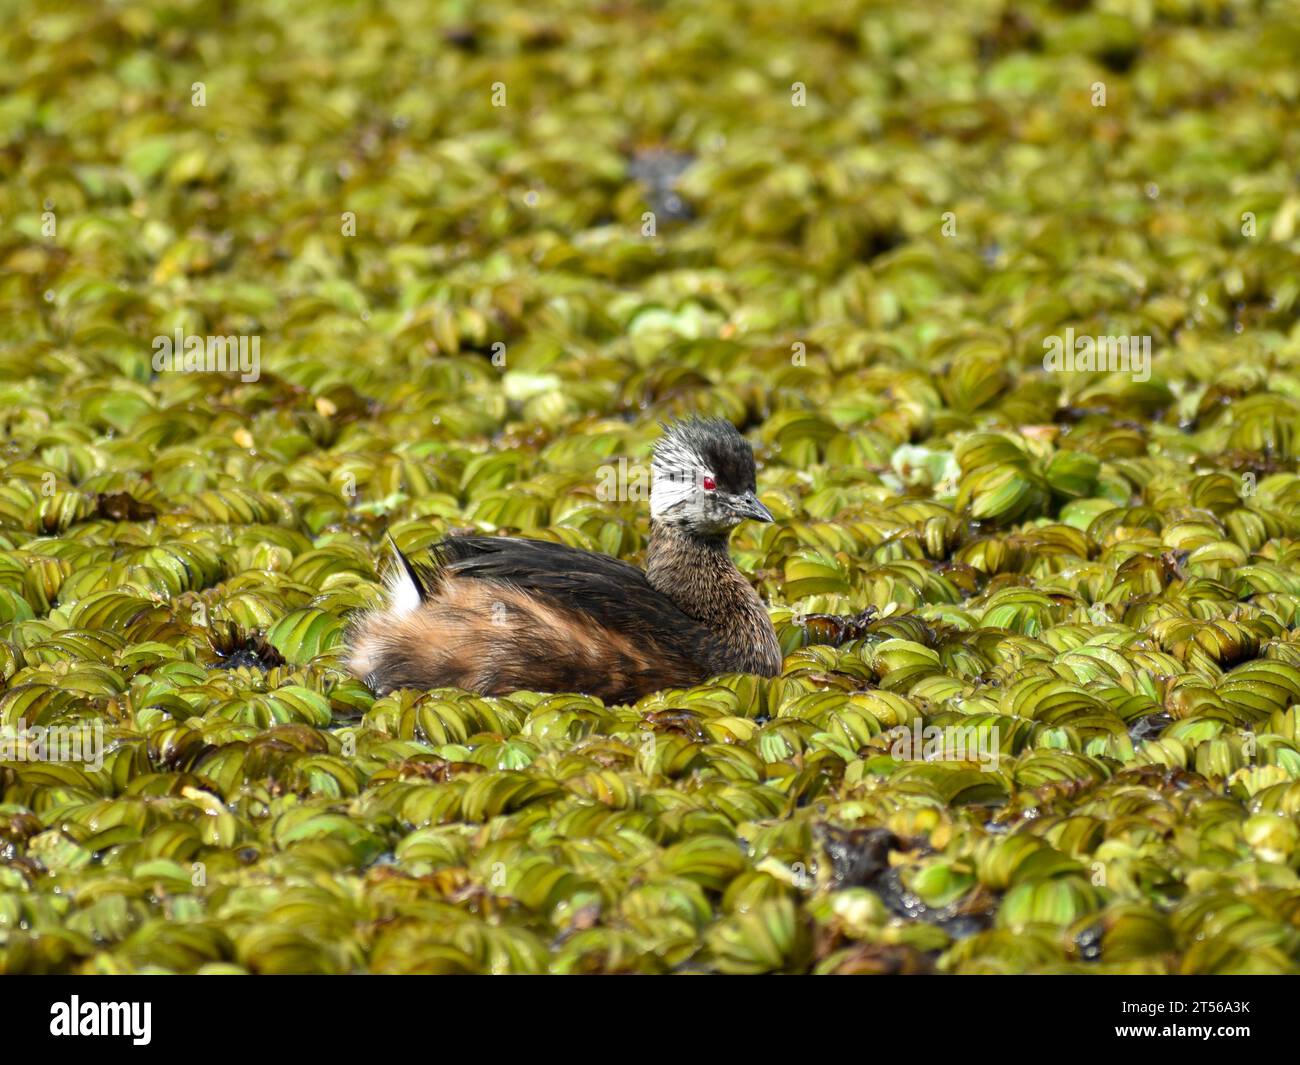 A white-tufted grebe (Rollandia rolland) in the wild swimming among aquatic plants, Reserva Ecologica Costanera Sur, Buenos Aires, Argentina, South Am Stock Photo